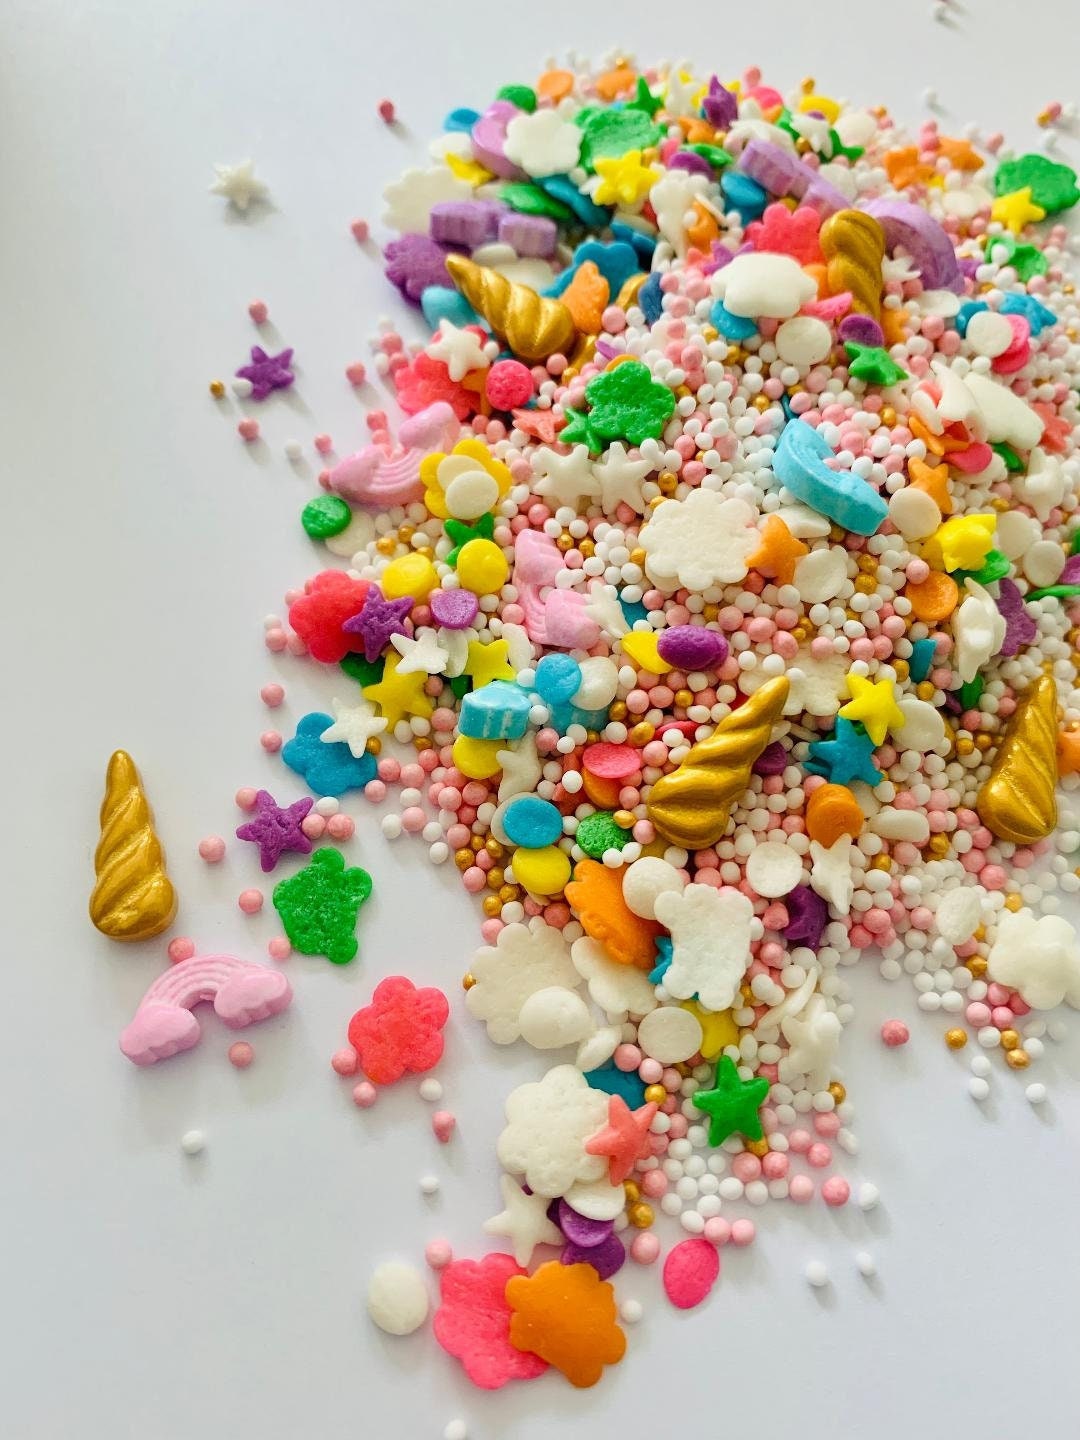 Flower Sprinkles - Pretty colorful little flowers to sprinkle atop your  homemade sweets!